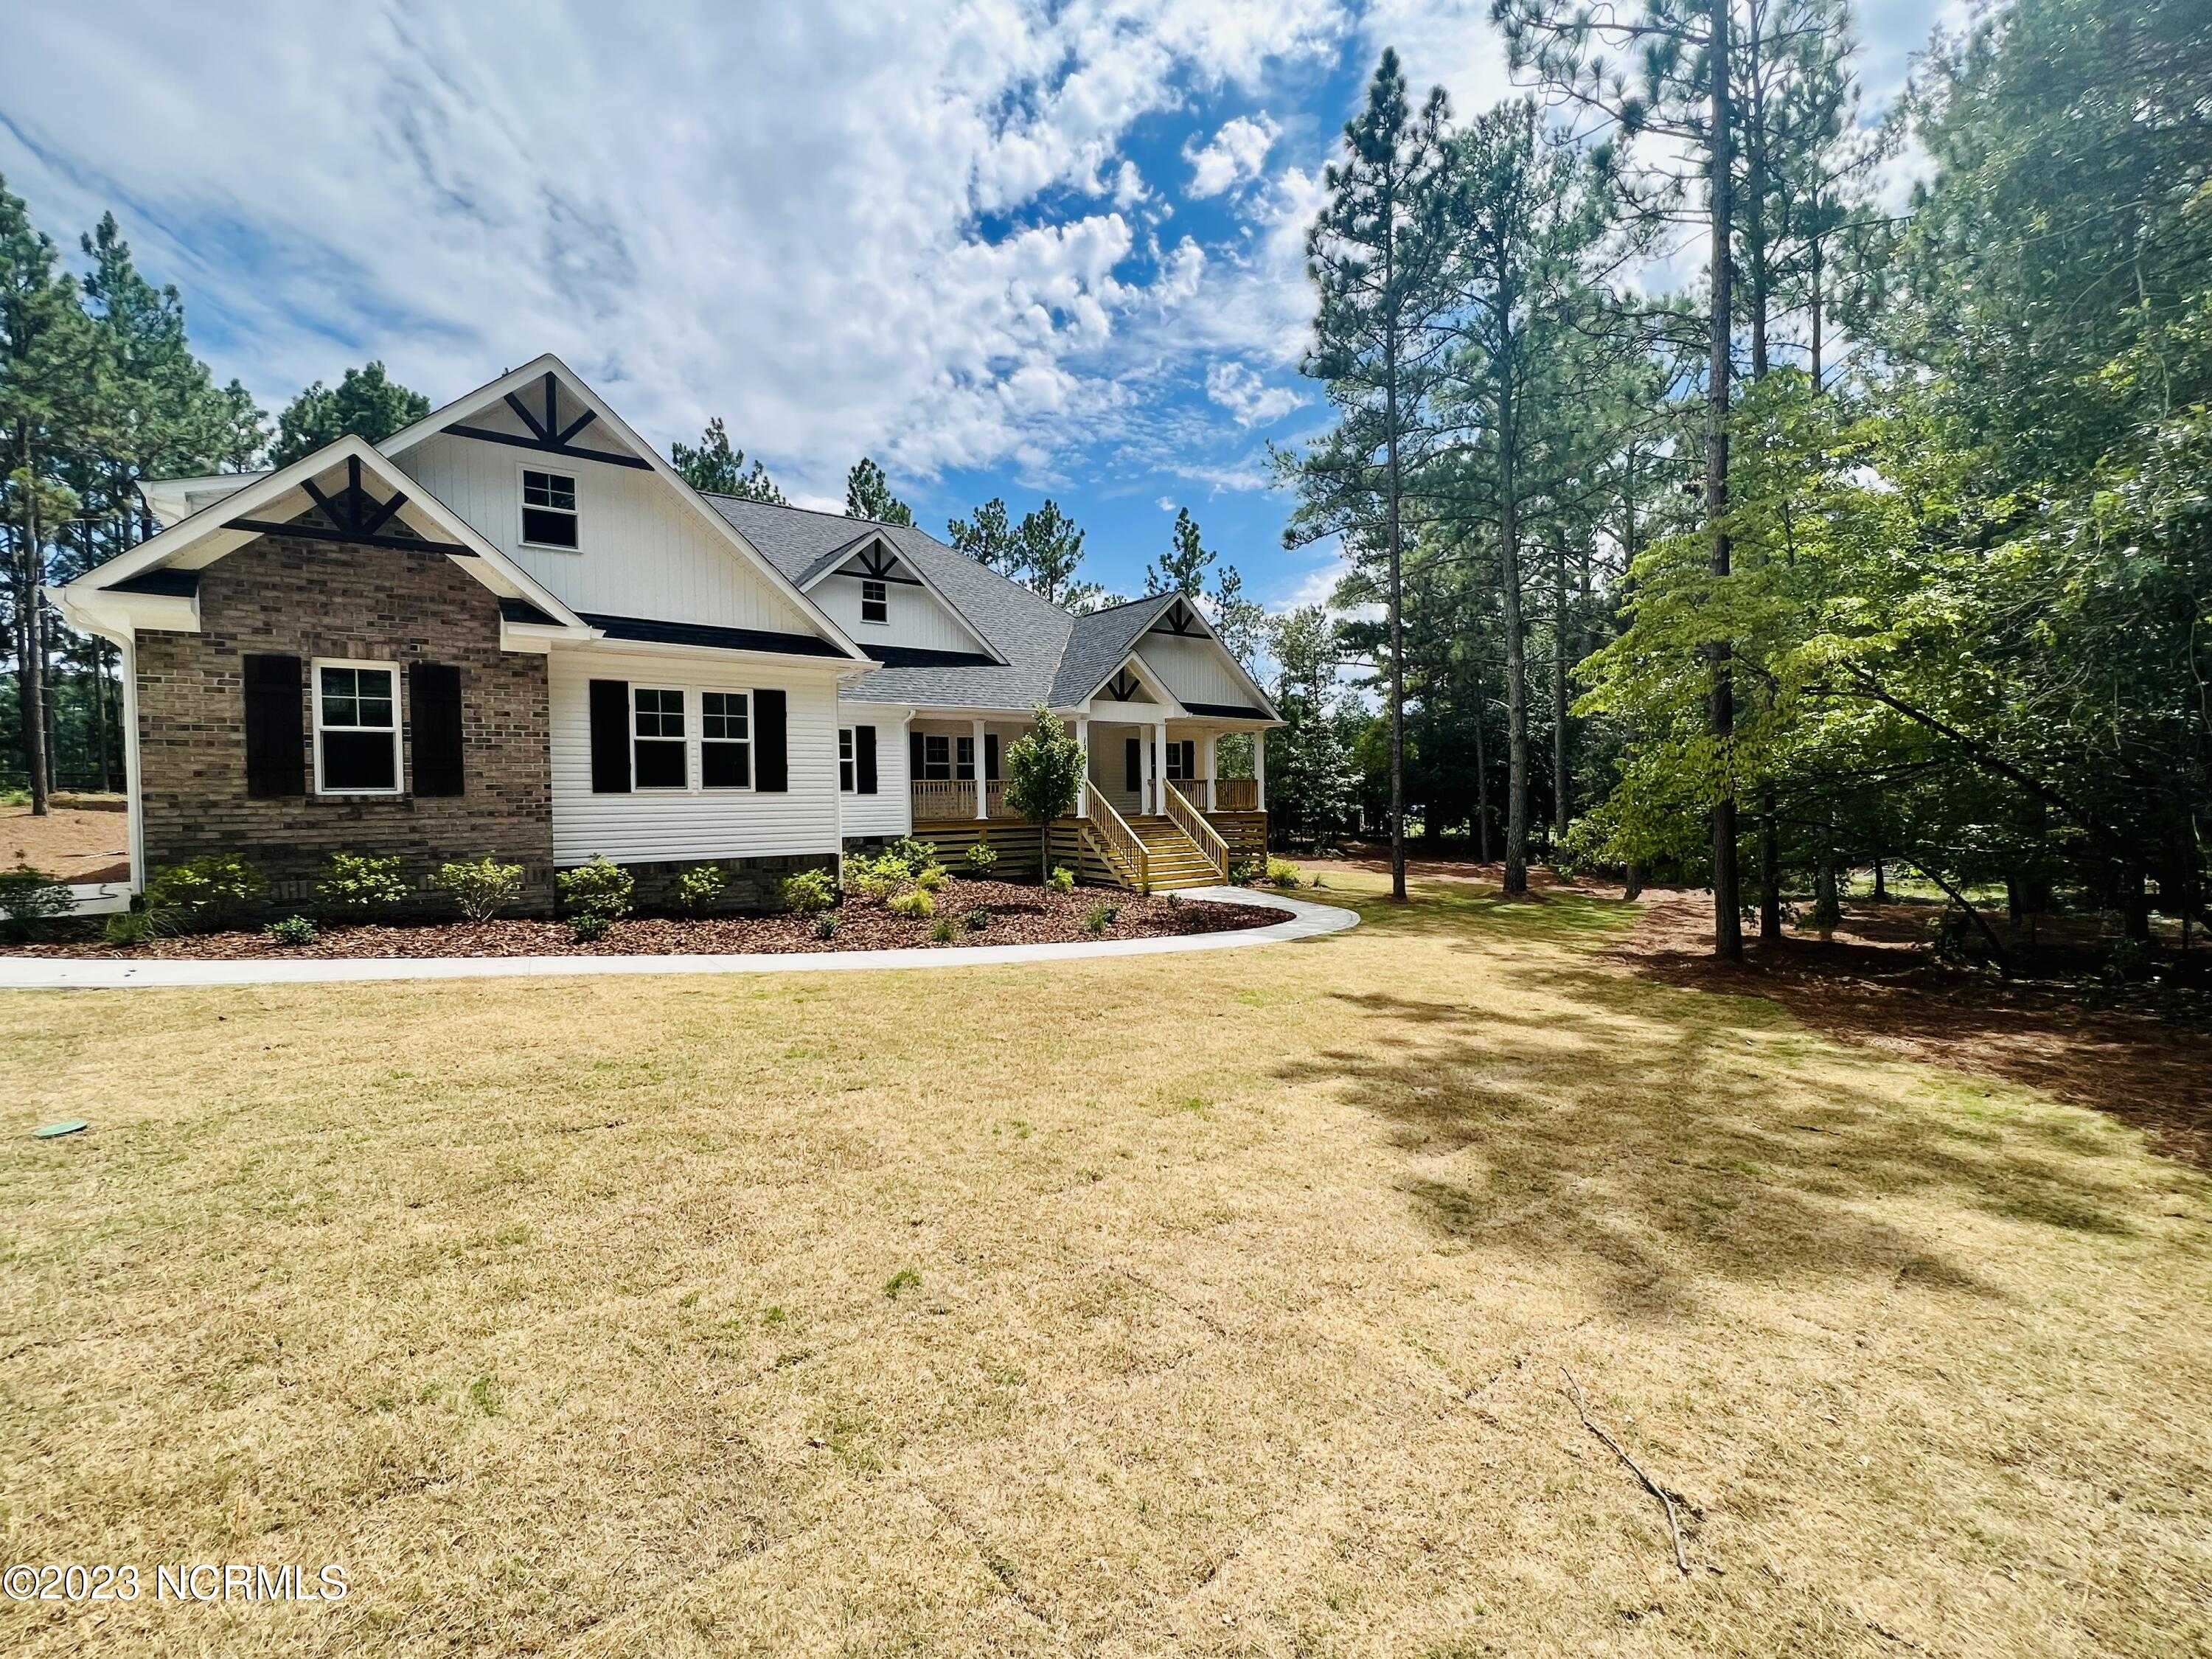 View Southern Pines, NC 28387 house